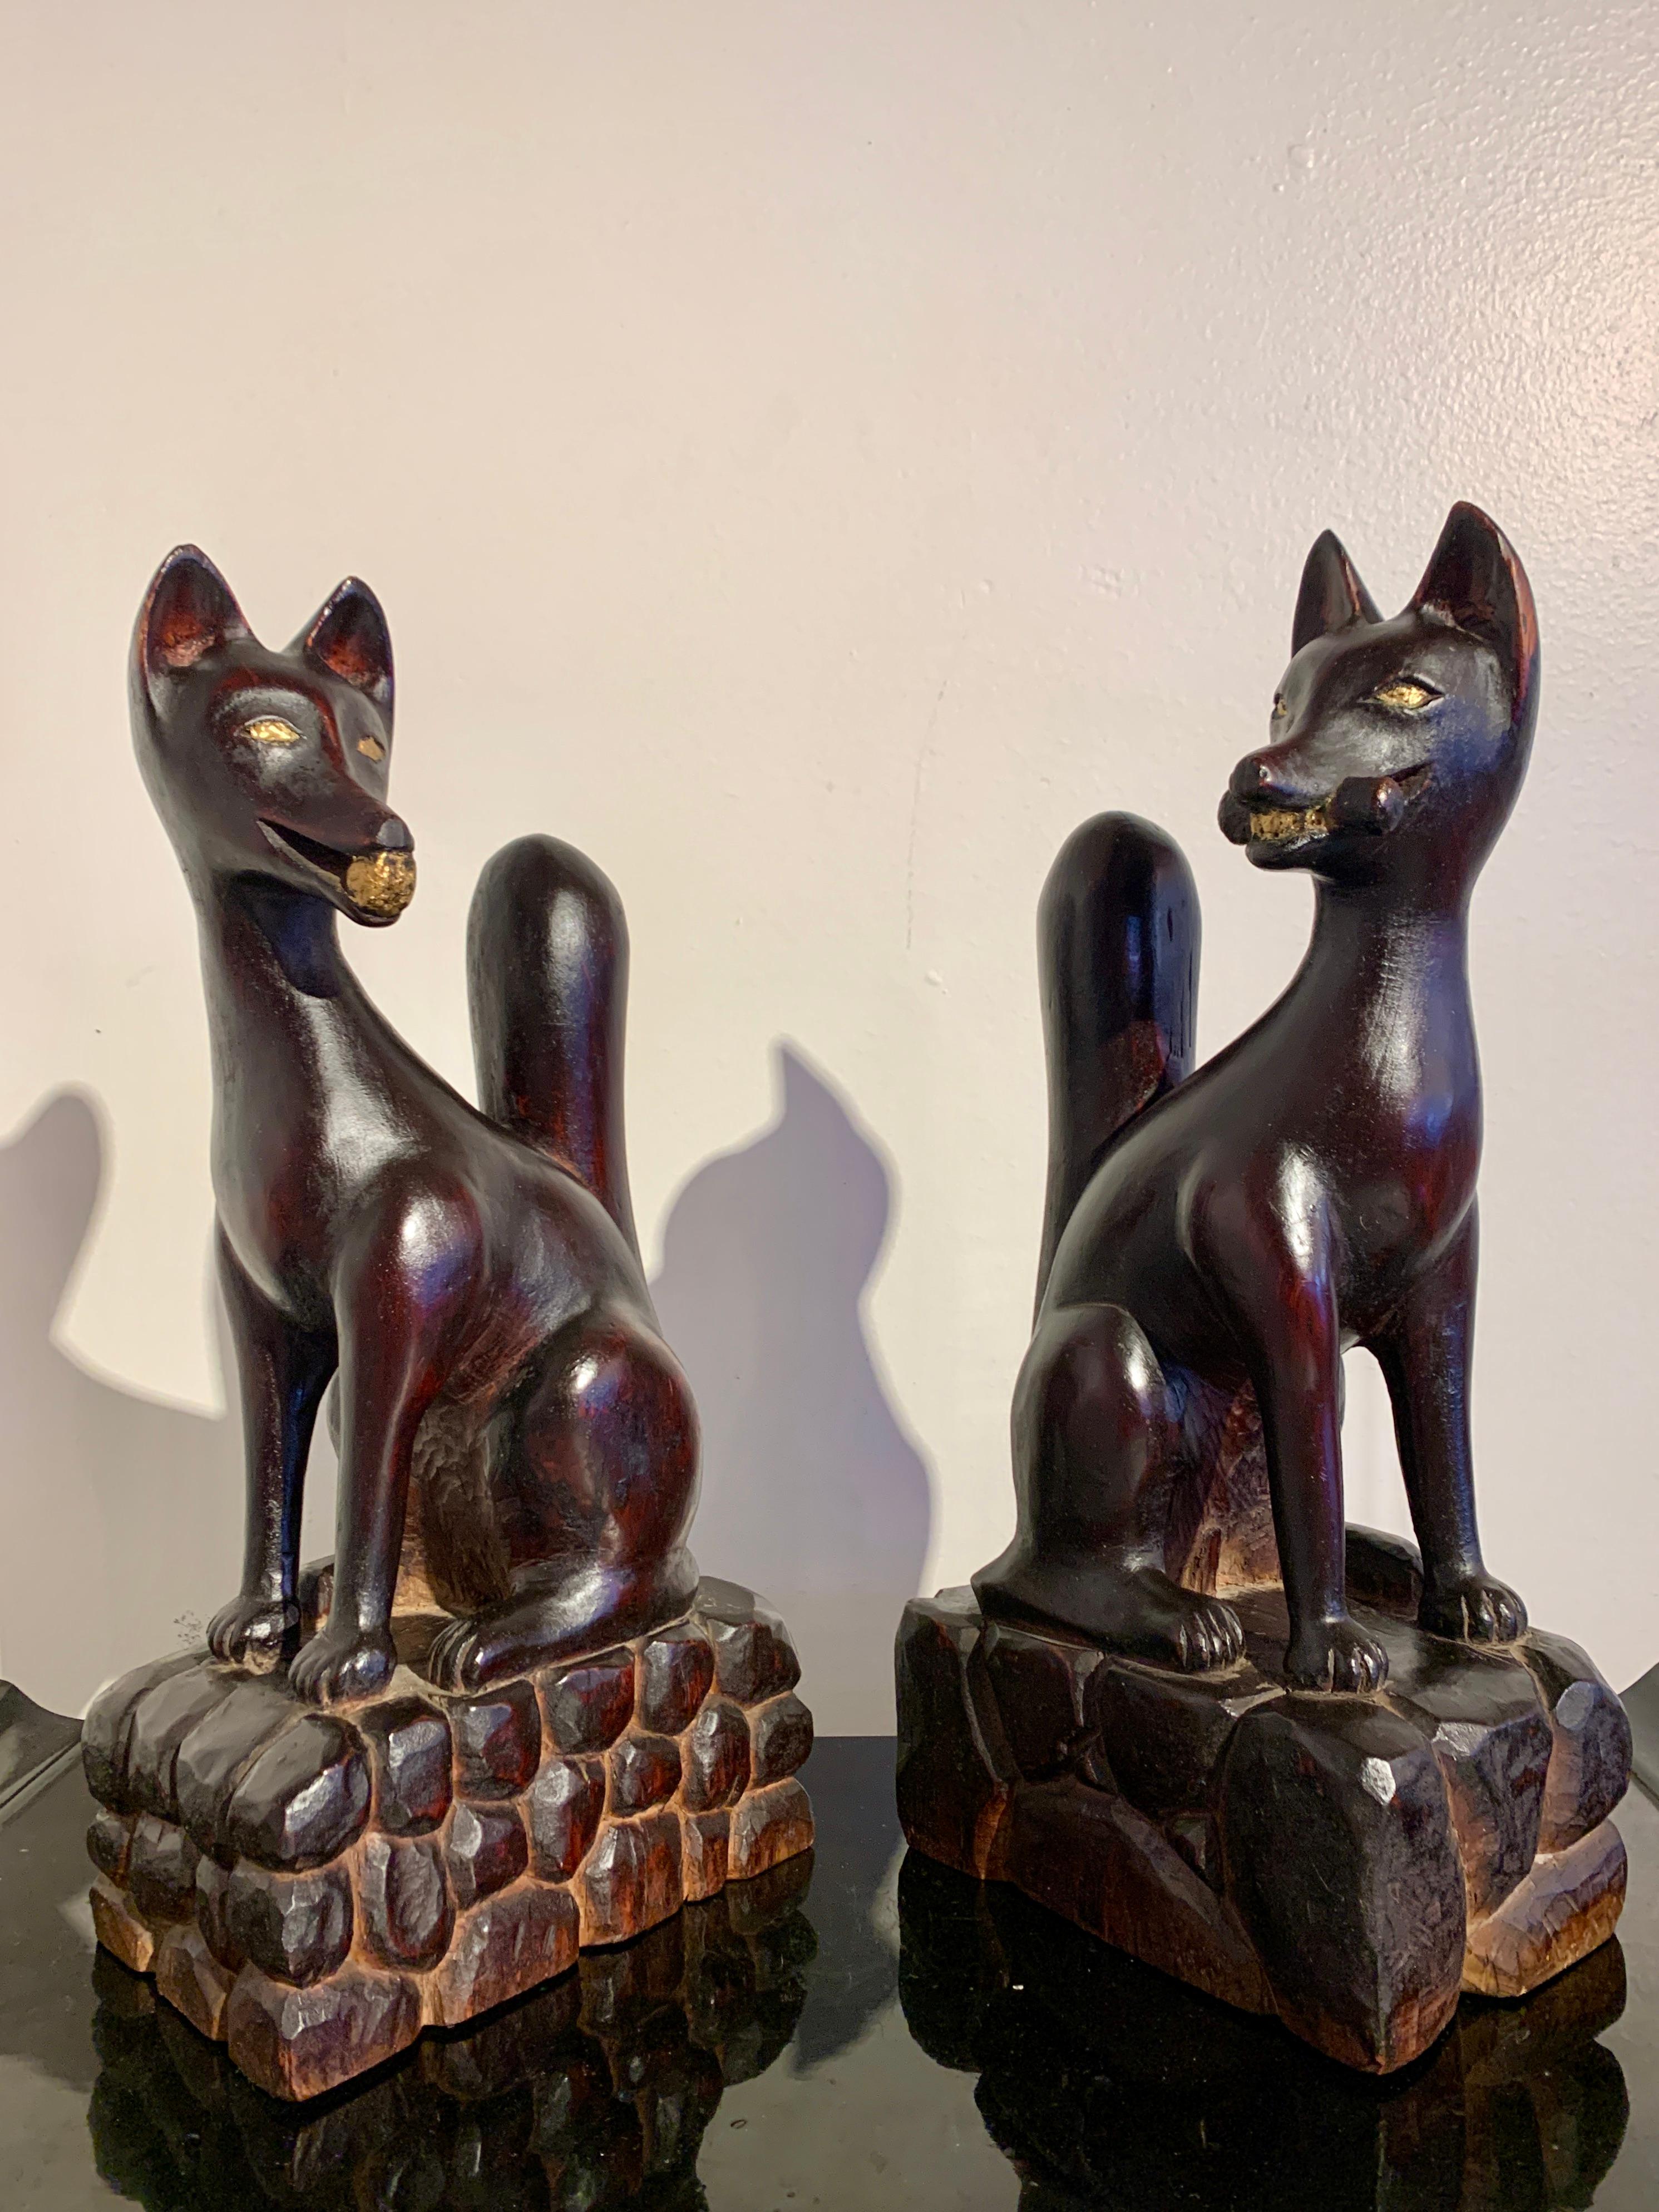 A delightful and mischievous pair of Japanese carved and lacquered wood Inari foxes, kitsune, dated Showa year twenty six, corresponding to 1951, Japan.

The foxes are carved from a single block of keyaki (elm) wood, and lacquered with polychrome